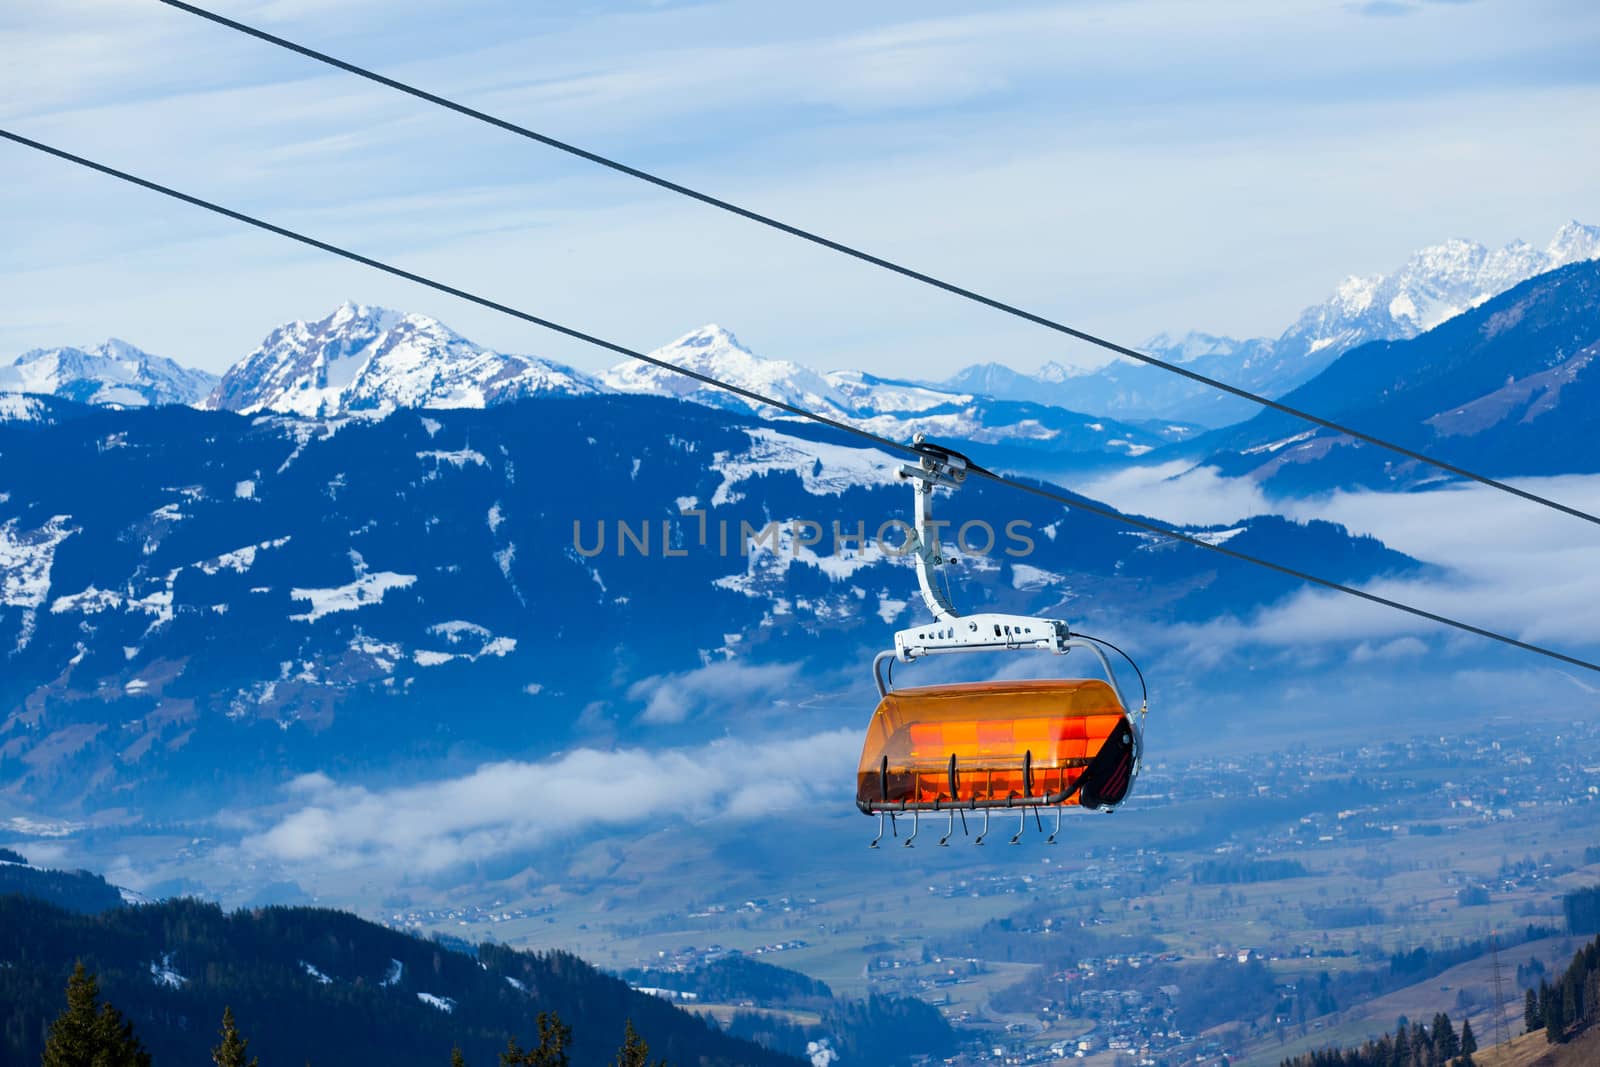 Cable car on the ski resort in Austria. On the background blue sky.